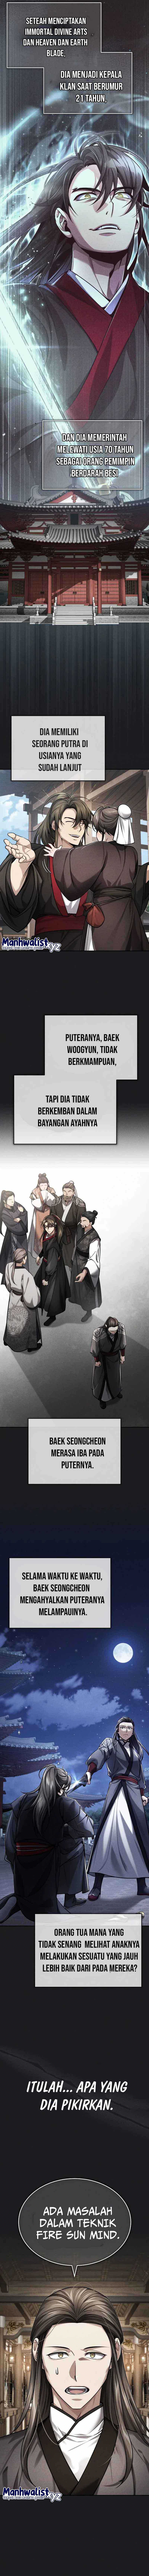 The Terminally Ill Young Master of the Baek Clan Chapter 28